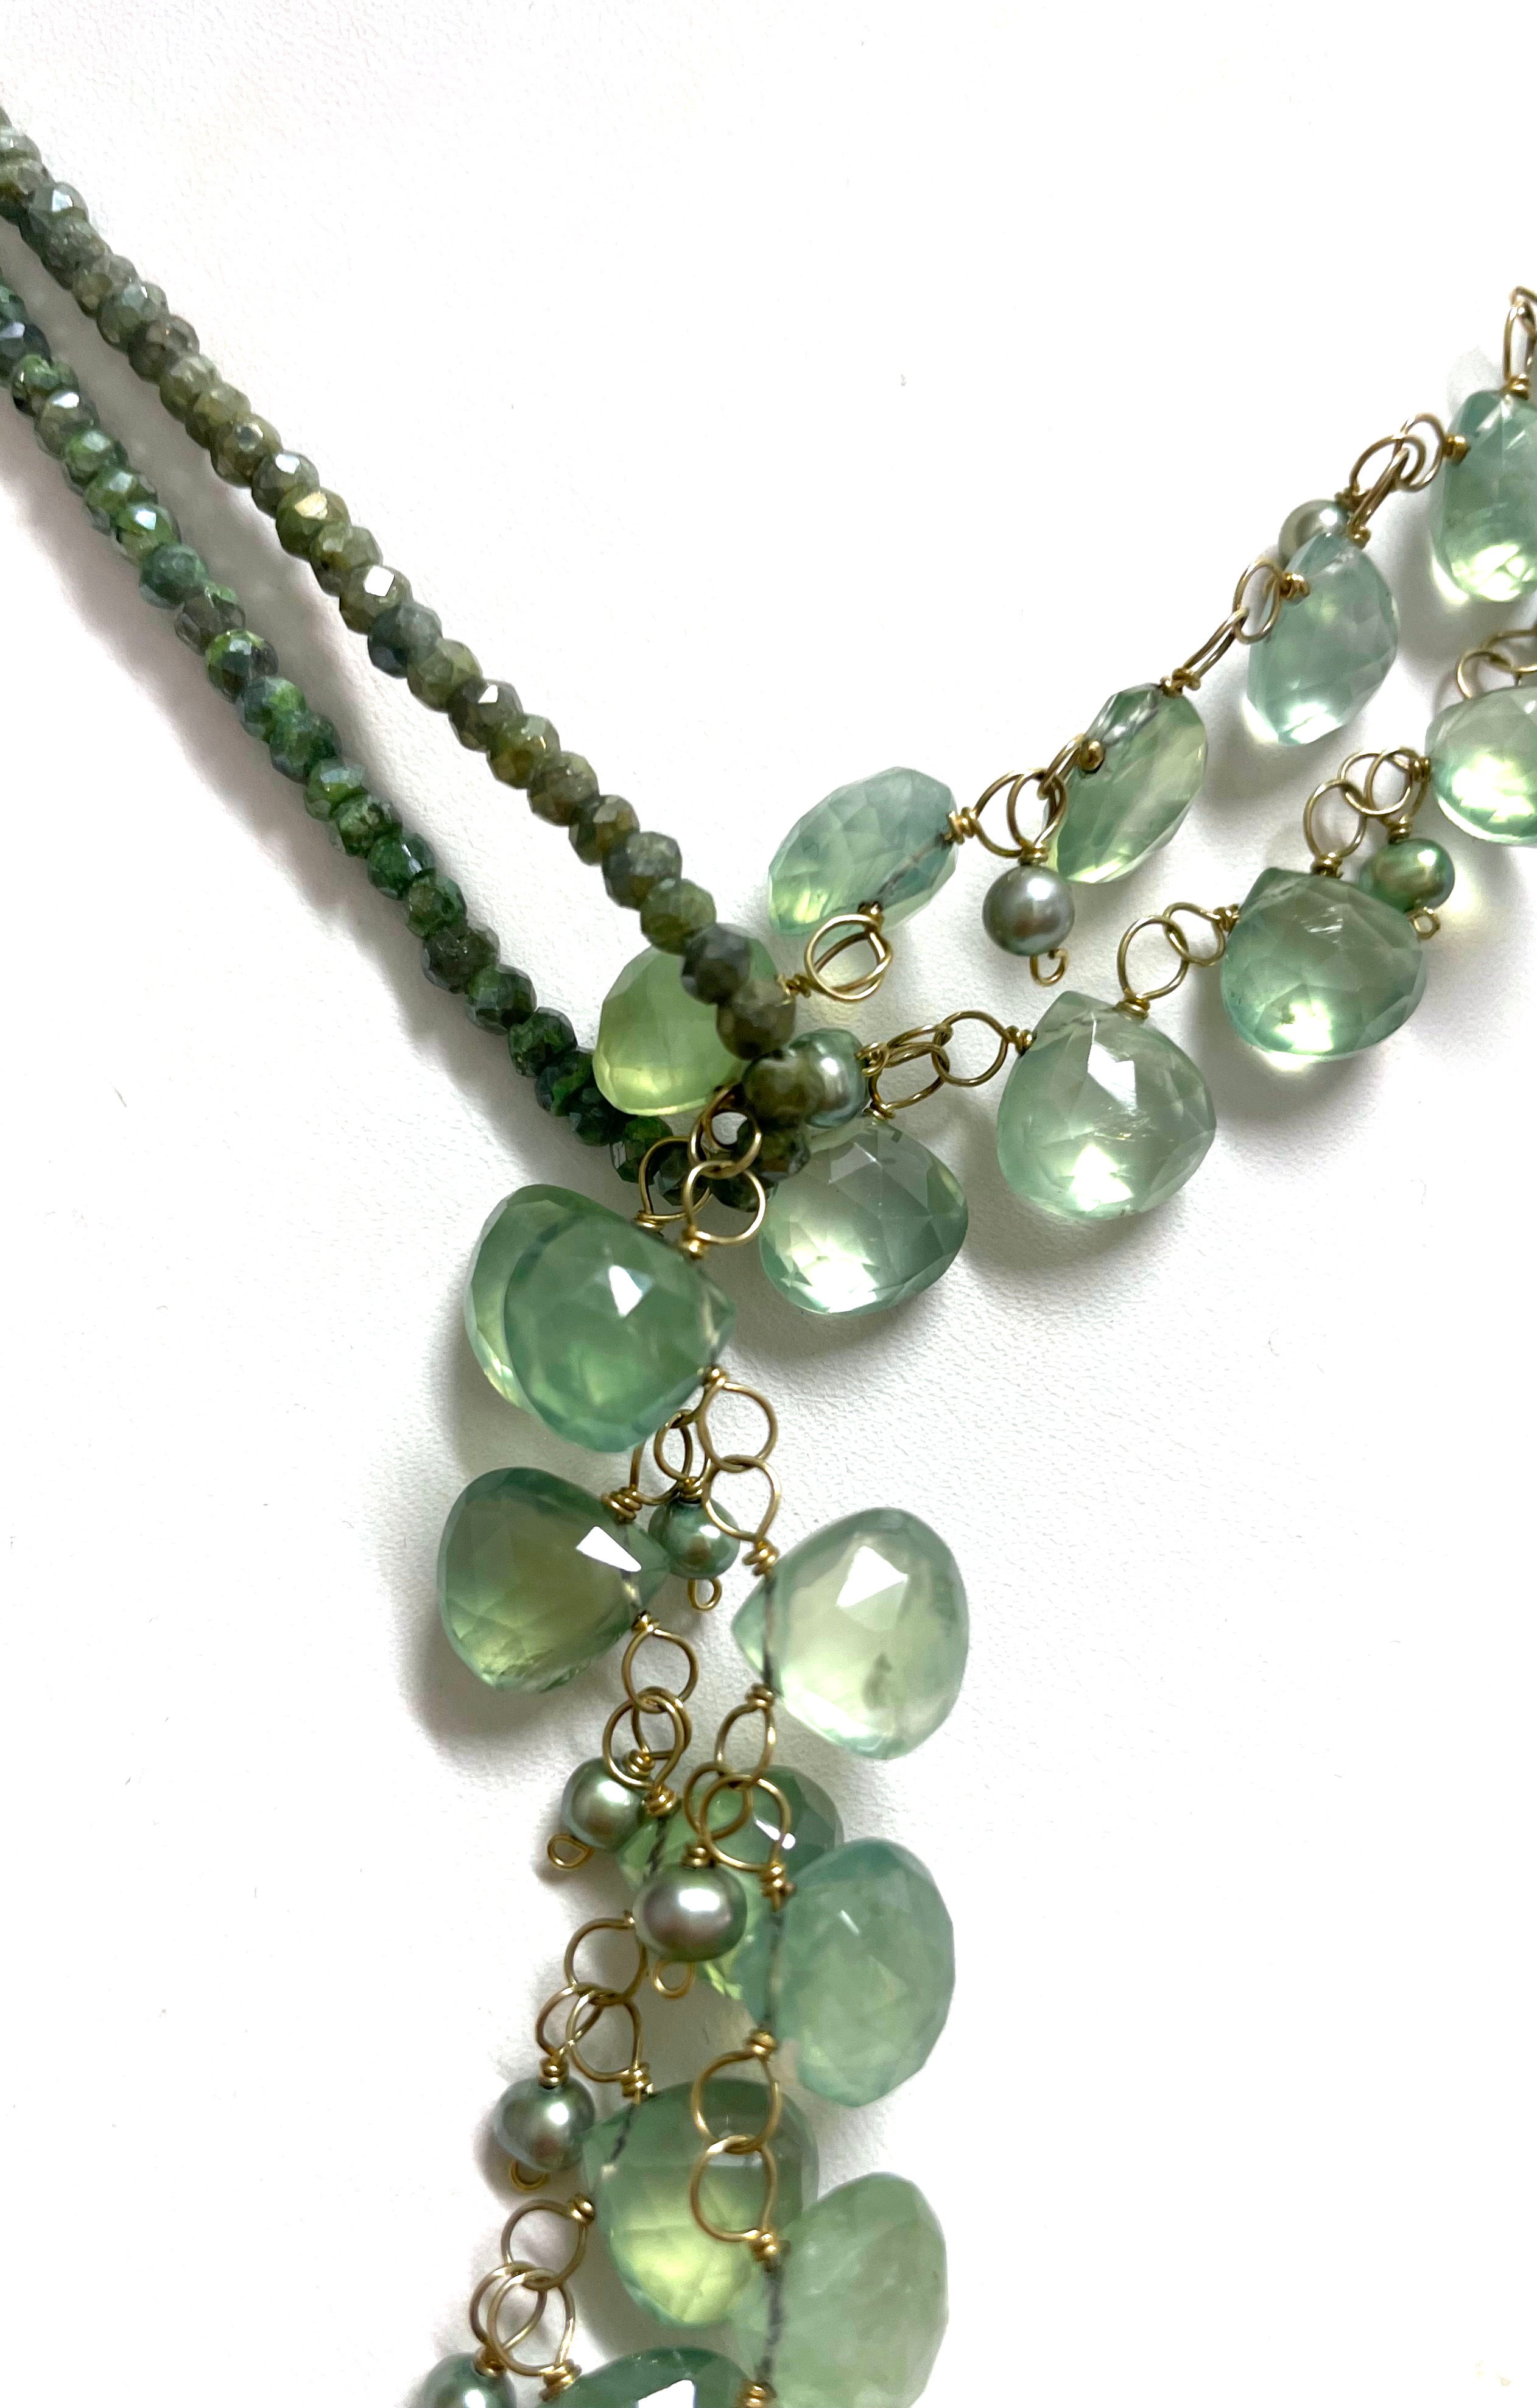 Description
The dramatic beauty of this unique and striking lariat lies in the uncommon combination of delicately hand wire-wrapped soft mint green Prehnite with flawless Tahitian pearls, and in the floating precious baby pearl accents giving grace